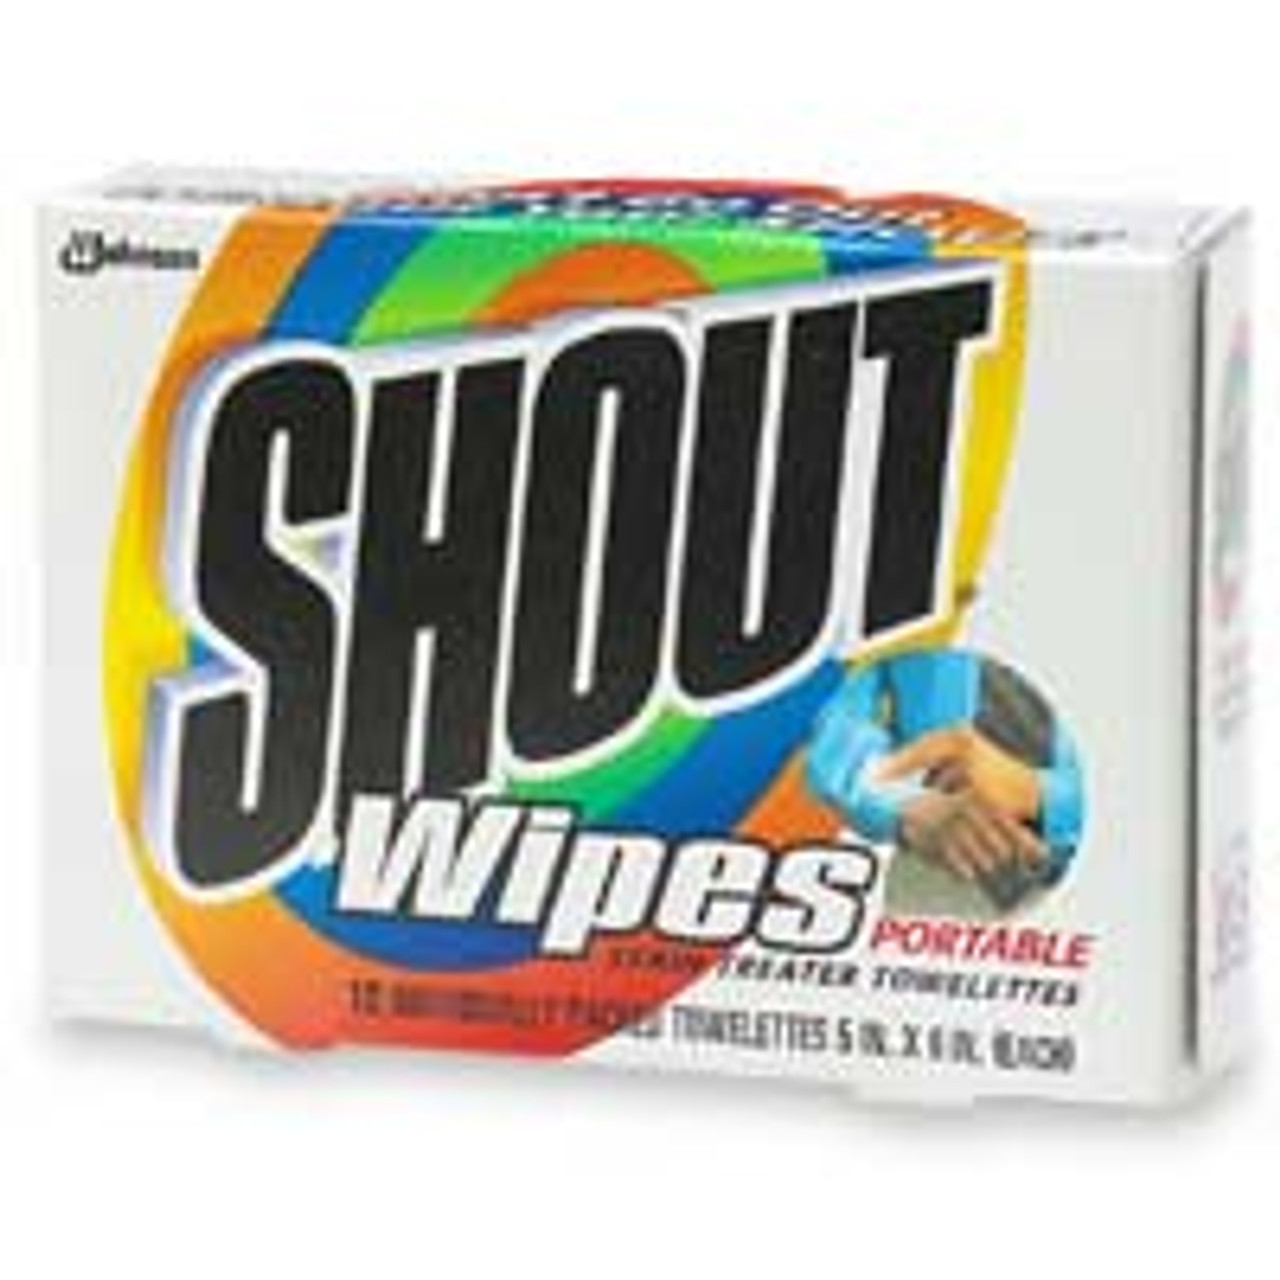 Shout Wipes, Wipe And Go Instant Stain Remover, Laundry Stain And